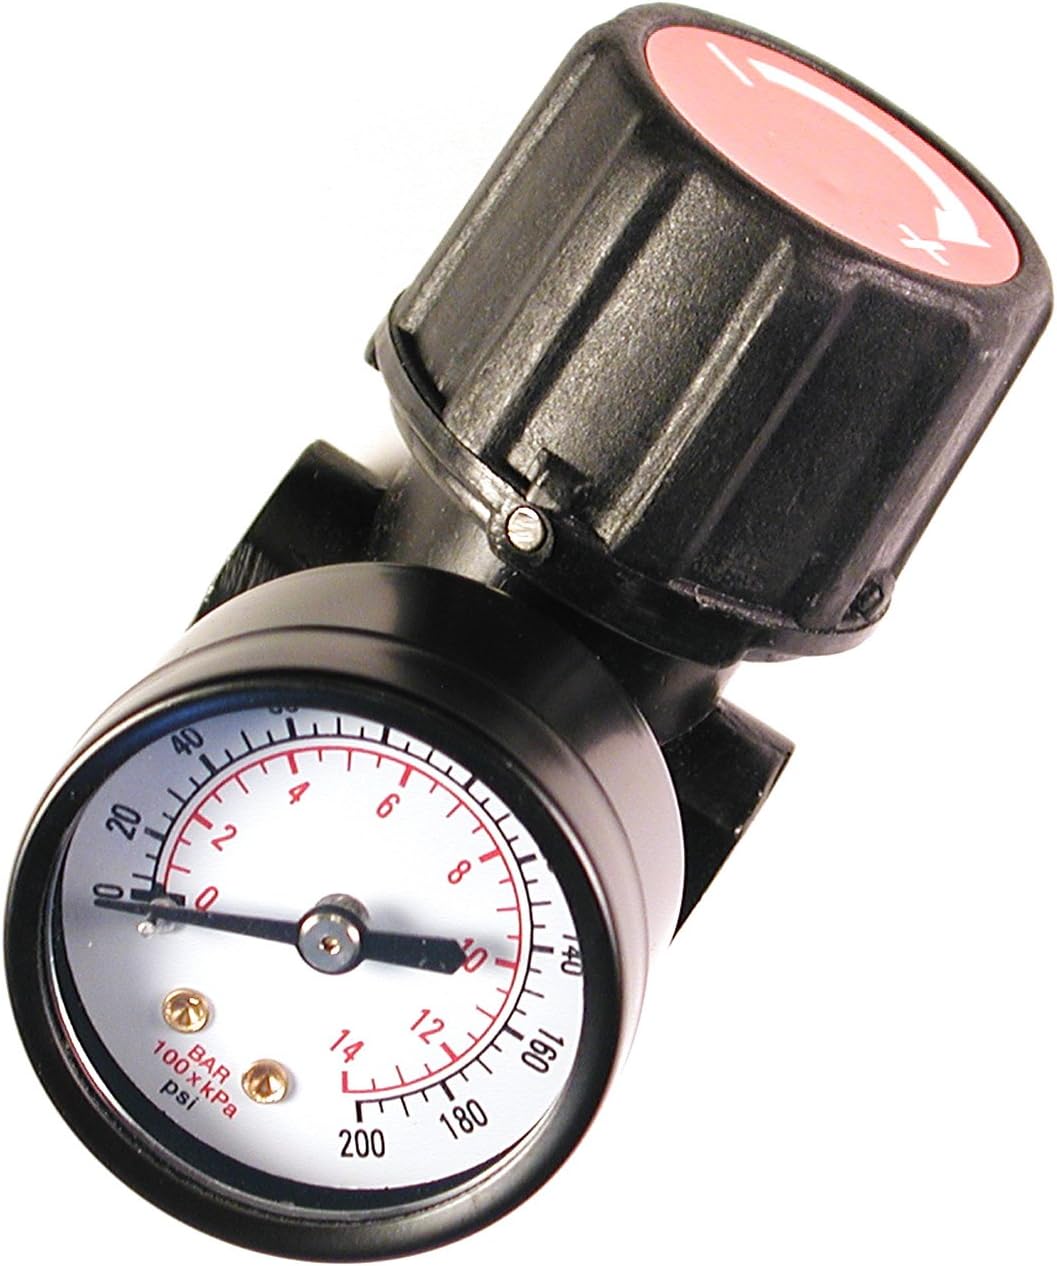 Cr1401g 0.25 In. Npt Replacement Air Regulator With Steel-protected Gauge